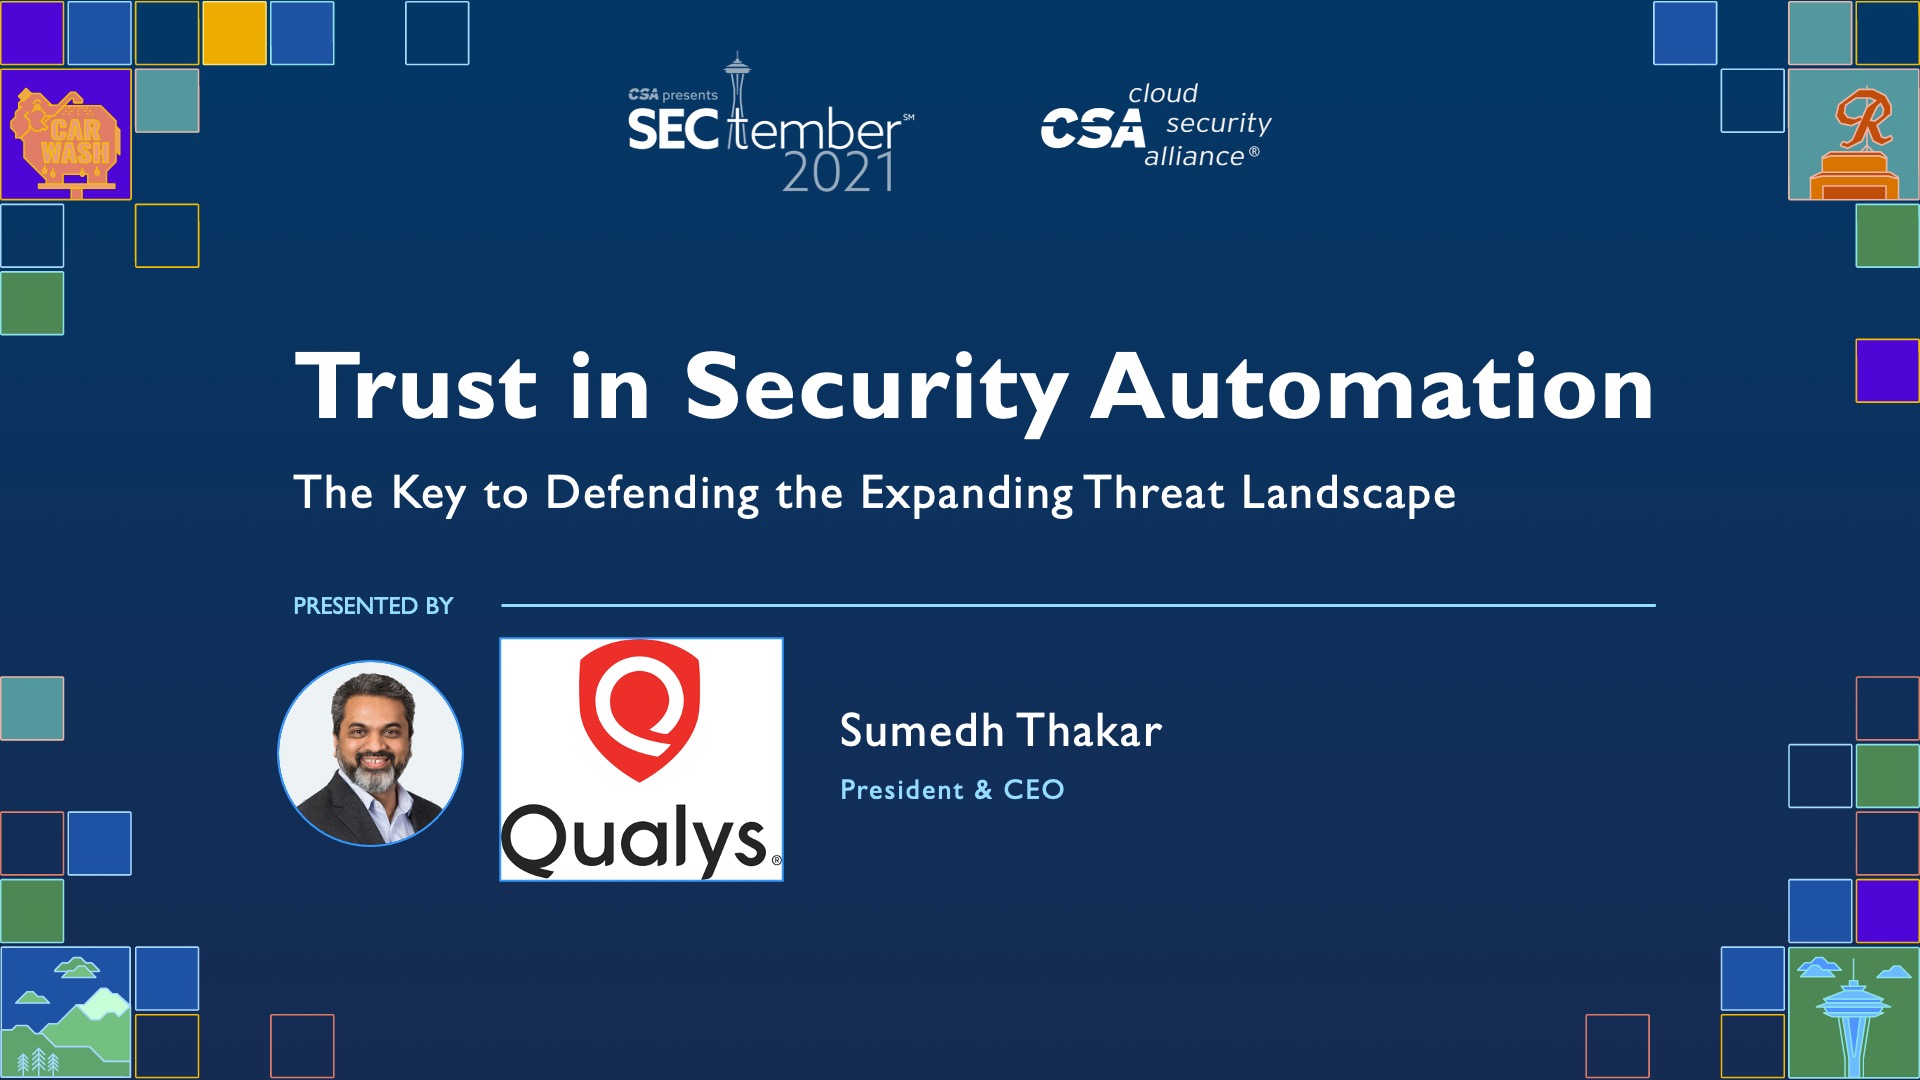 Trust in Security Automation – The Key to Defending the Expanding Threat Landscape